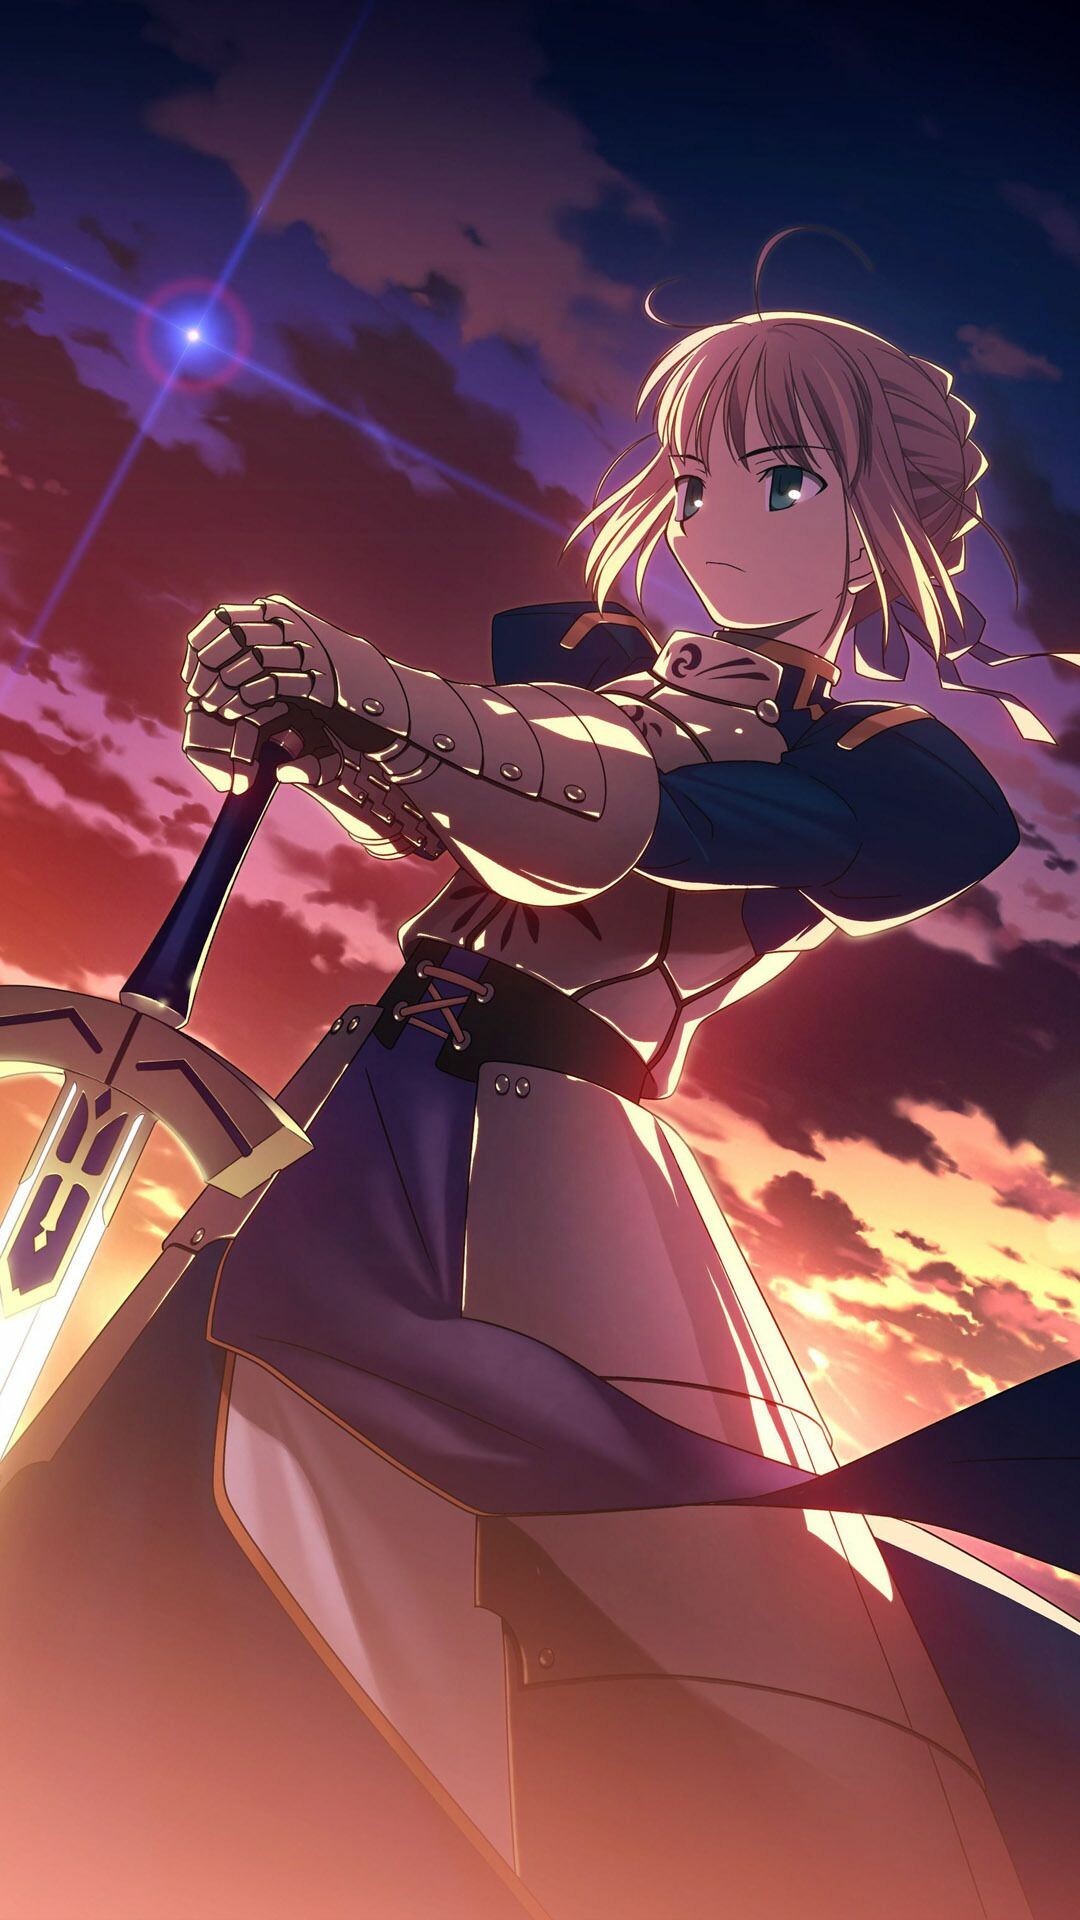 Fate/stay night: Heaven's Feel: Saber, Fate Series, Japanese anime film trilogy. 1080x1920 Full HD Background.